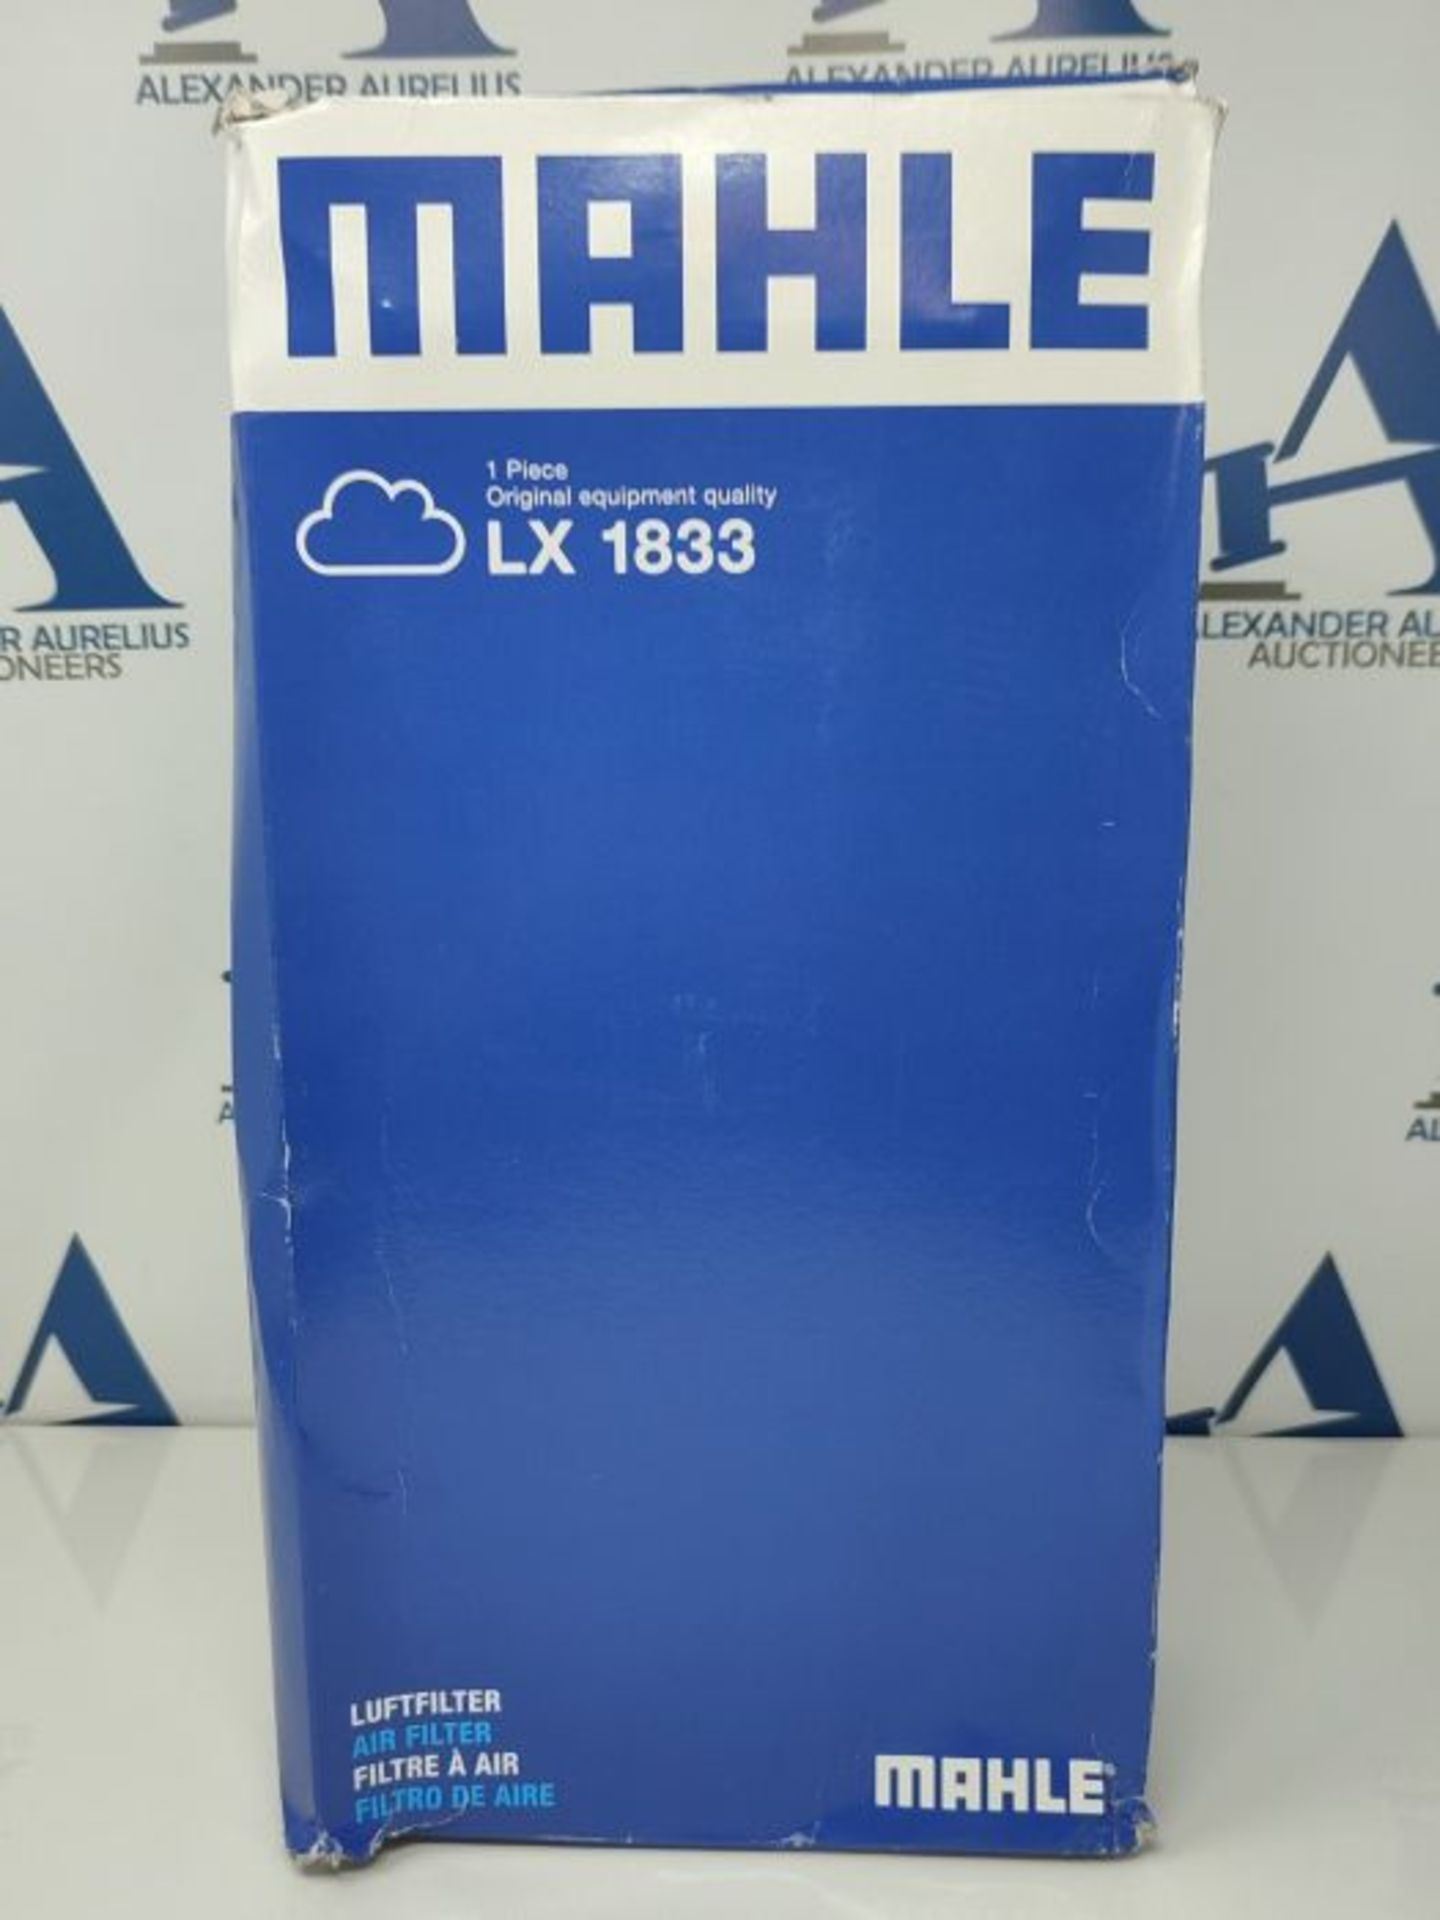 MAHLE LX 1833 - Air Filter Car - Engine - Image 2 of 3